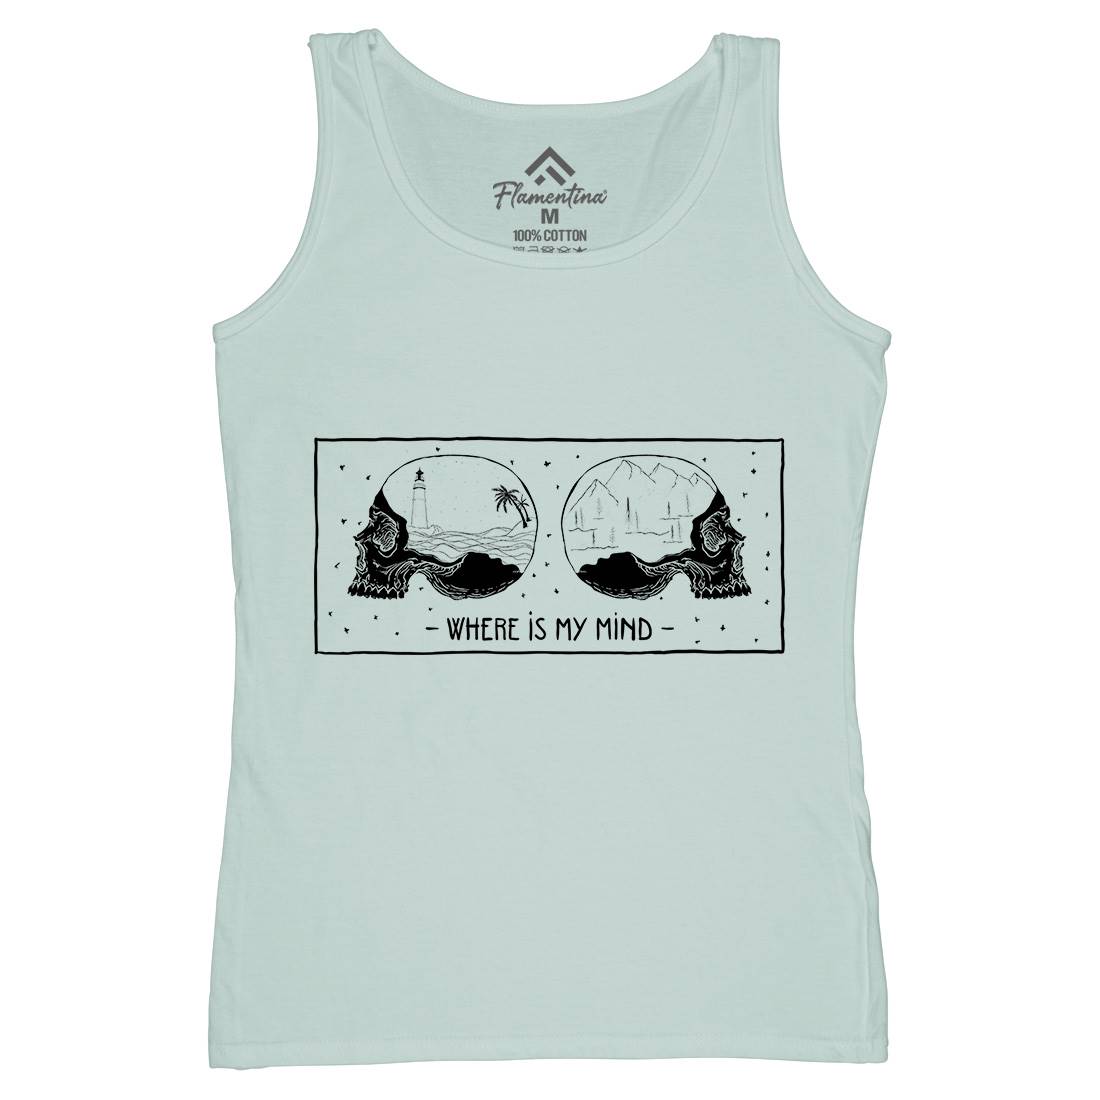 Where Is My Mind Womens Organic Tank Top Vest Quotes D497